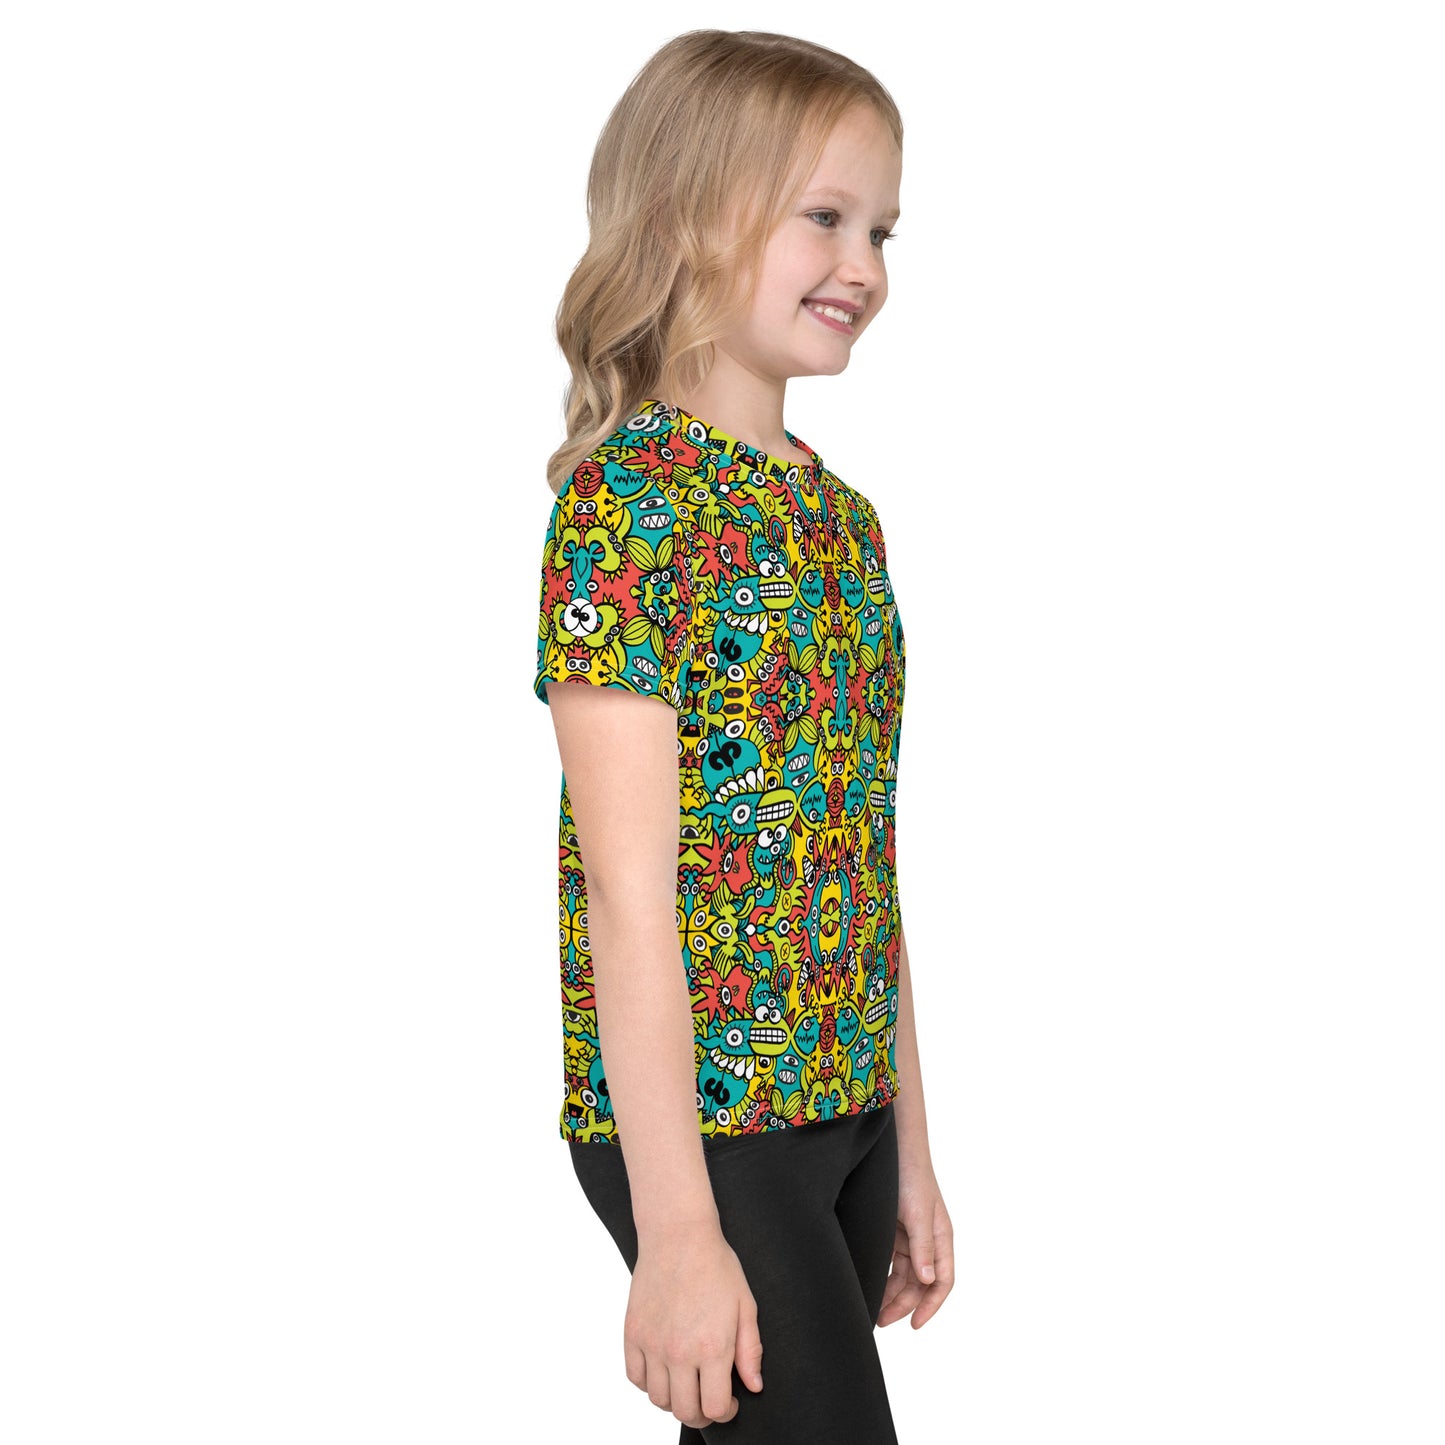 Doodle Dreamscape: Cosmic Critter Carnival - Kids crew neck t-shirt. Side view